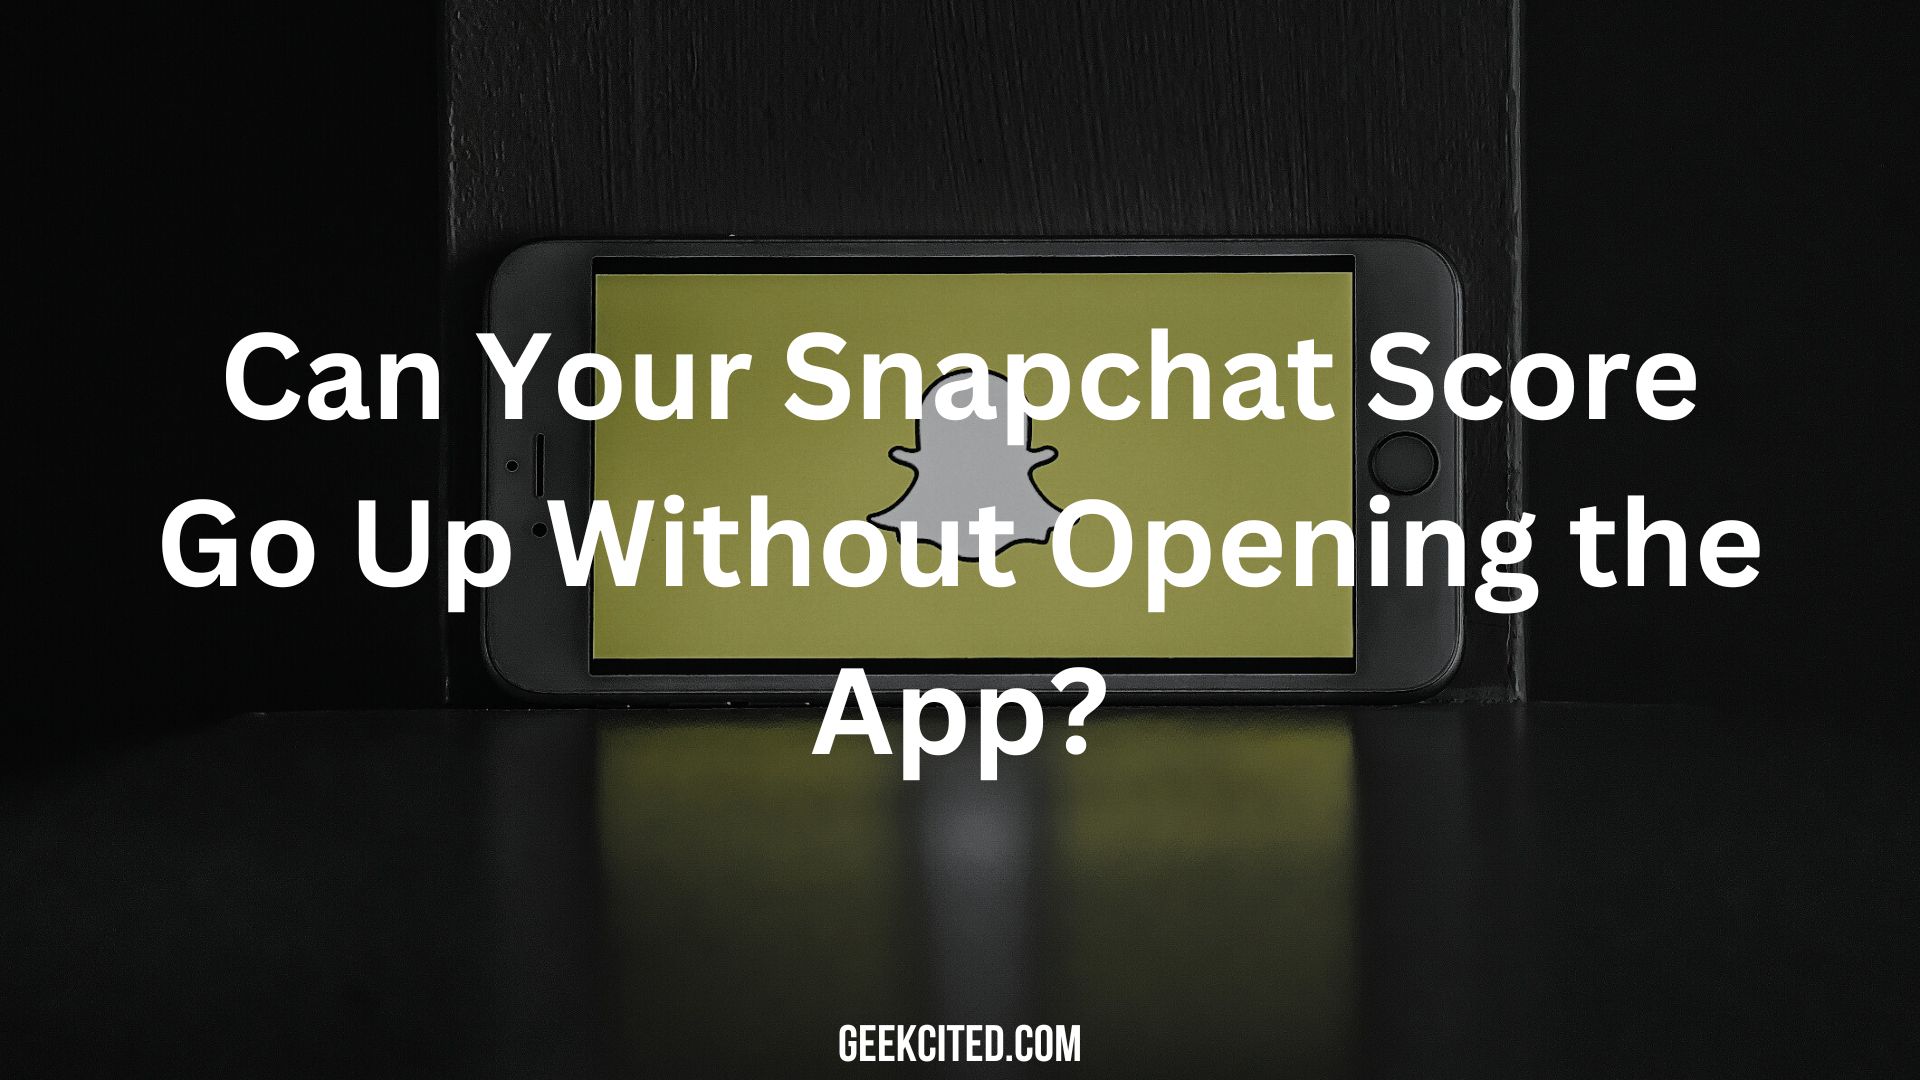 Can Your Snapchat Score Go Up Without Opening the App